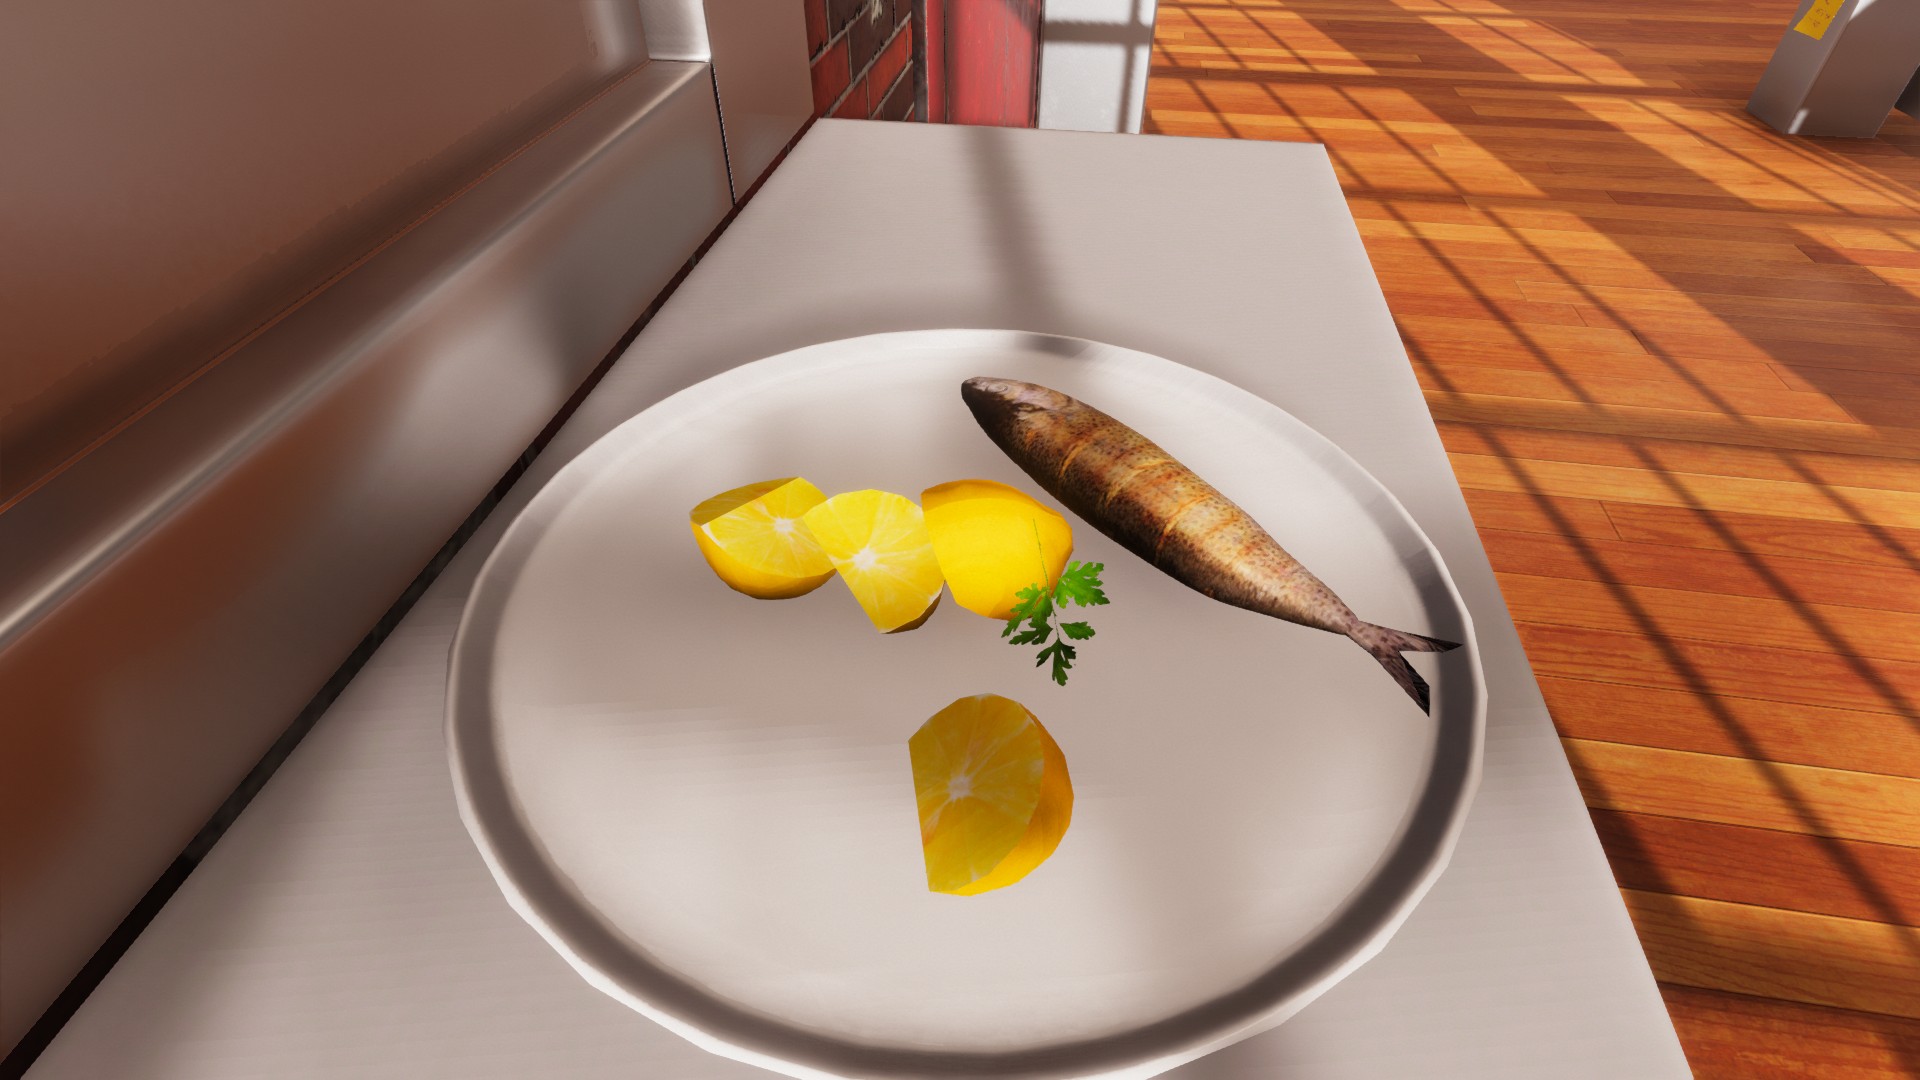 I Dropped Baked Trout On The Floor And Served It To A Food